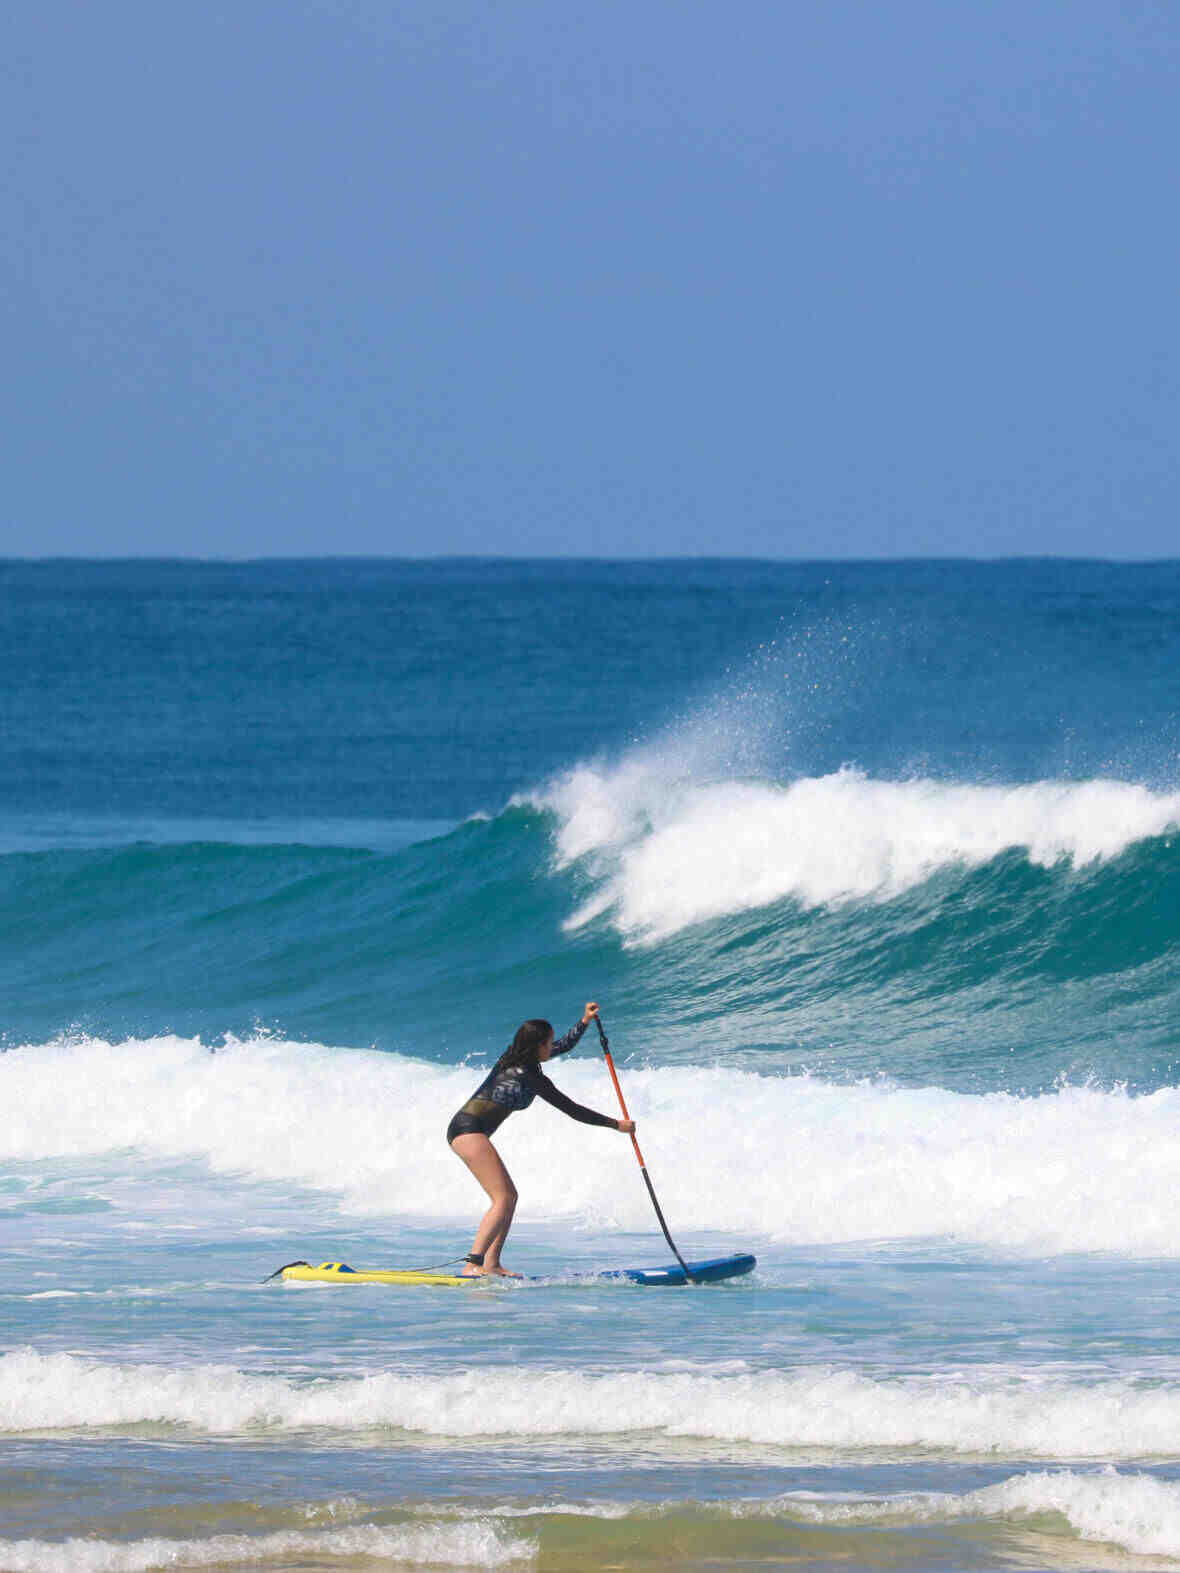 What is the most important surf safety rule?